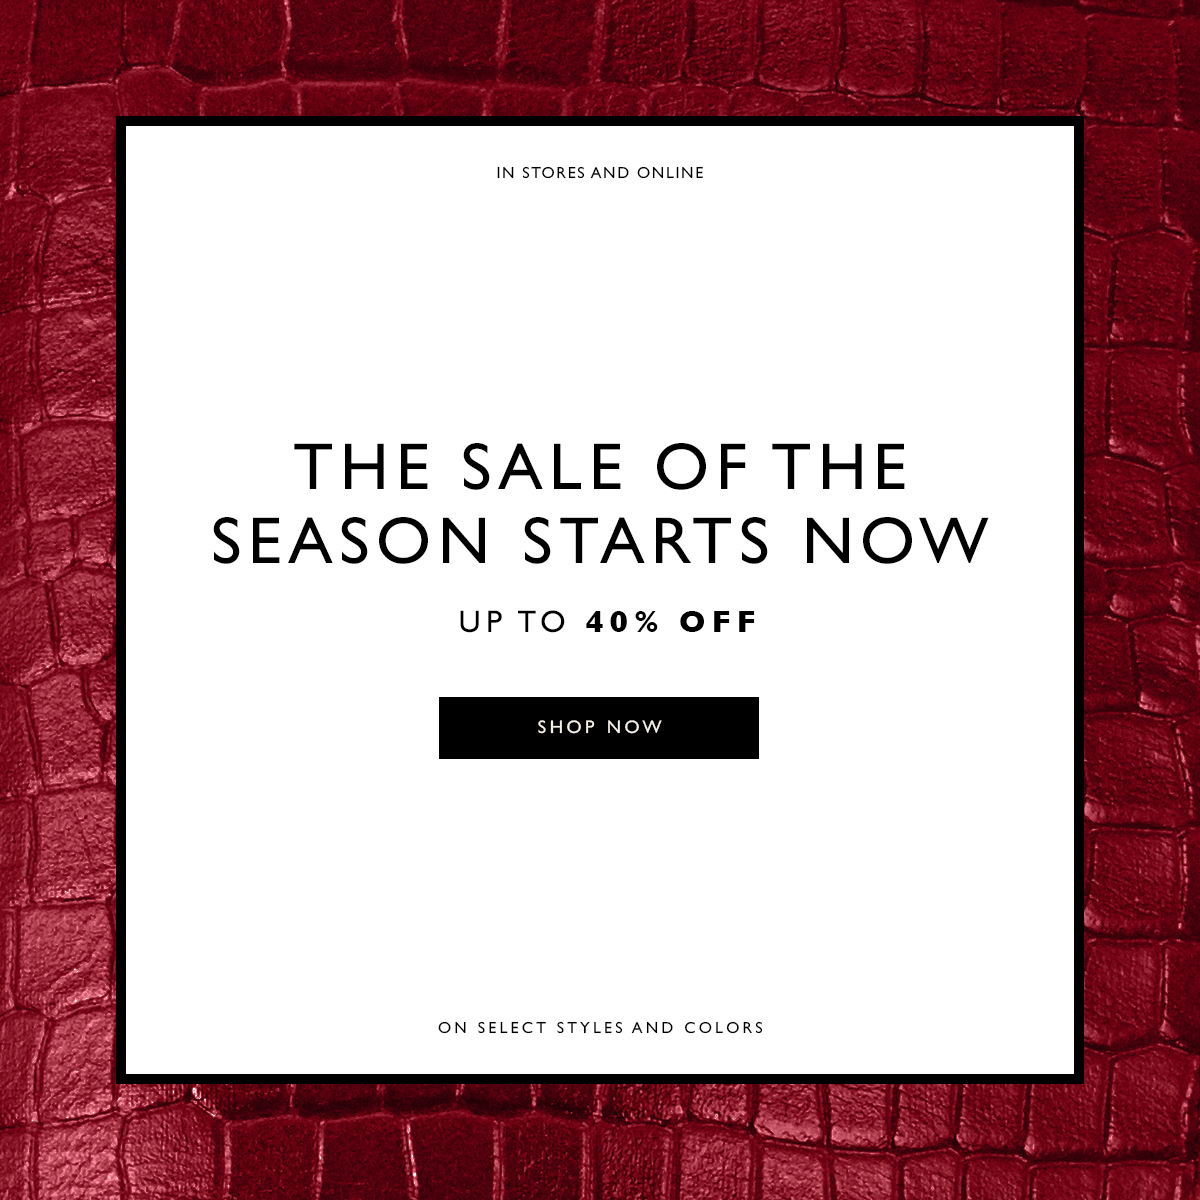  In Stores and Online. The Sale of the Season Starts Now. Up to 40% off. SHOP NOW. On select styles and colors